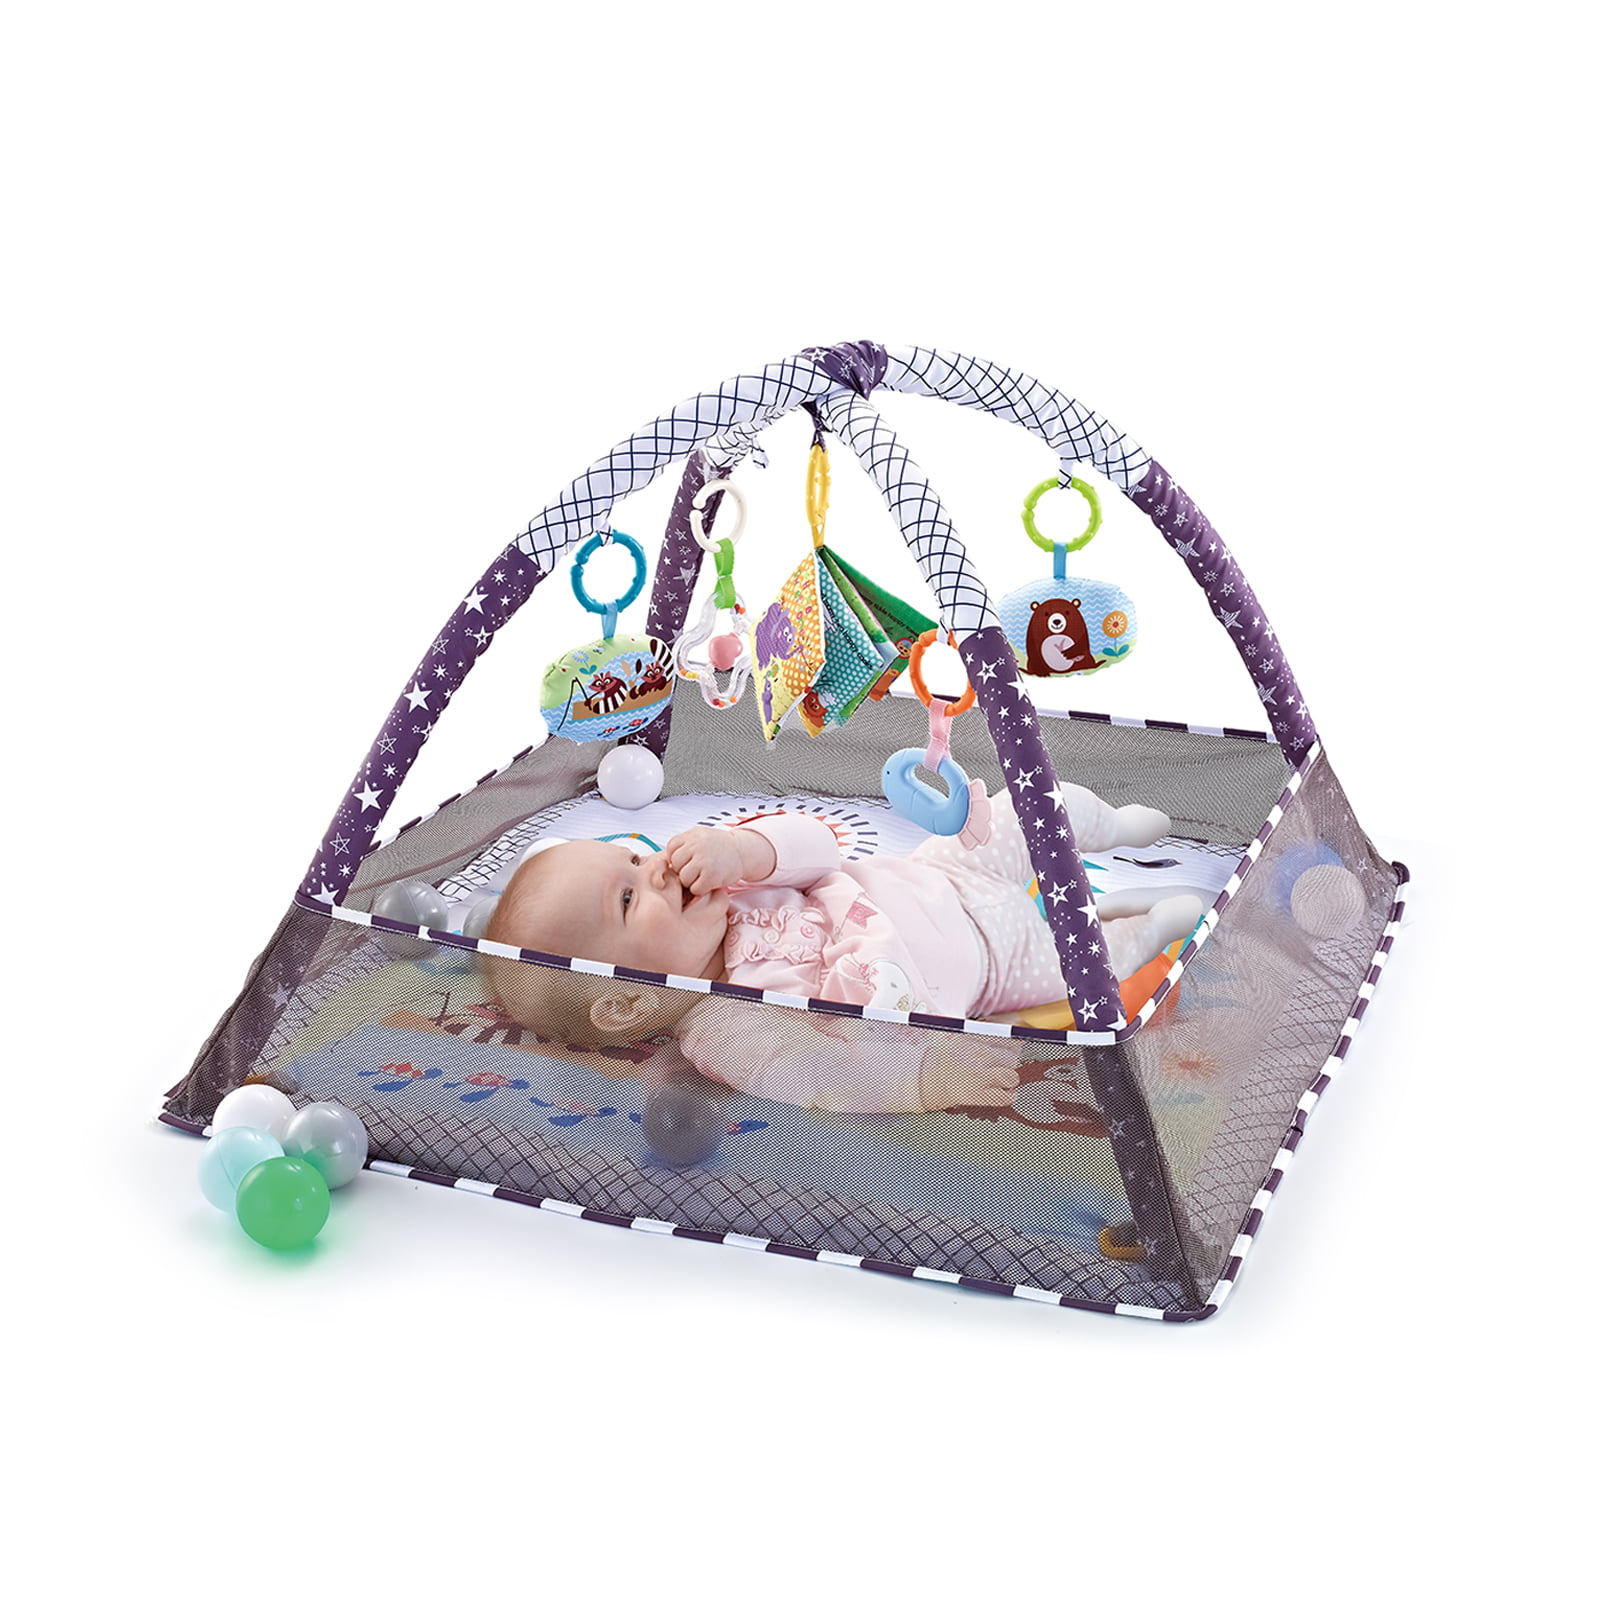 Baby Play Gym and Infant Play Mat with Protective Nets Toddler Activity Center with 5 Hanging Toys,Baby Activity Gym and Ball Pit for Sensory Exploration and Motor Skill Development